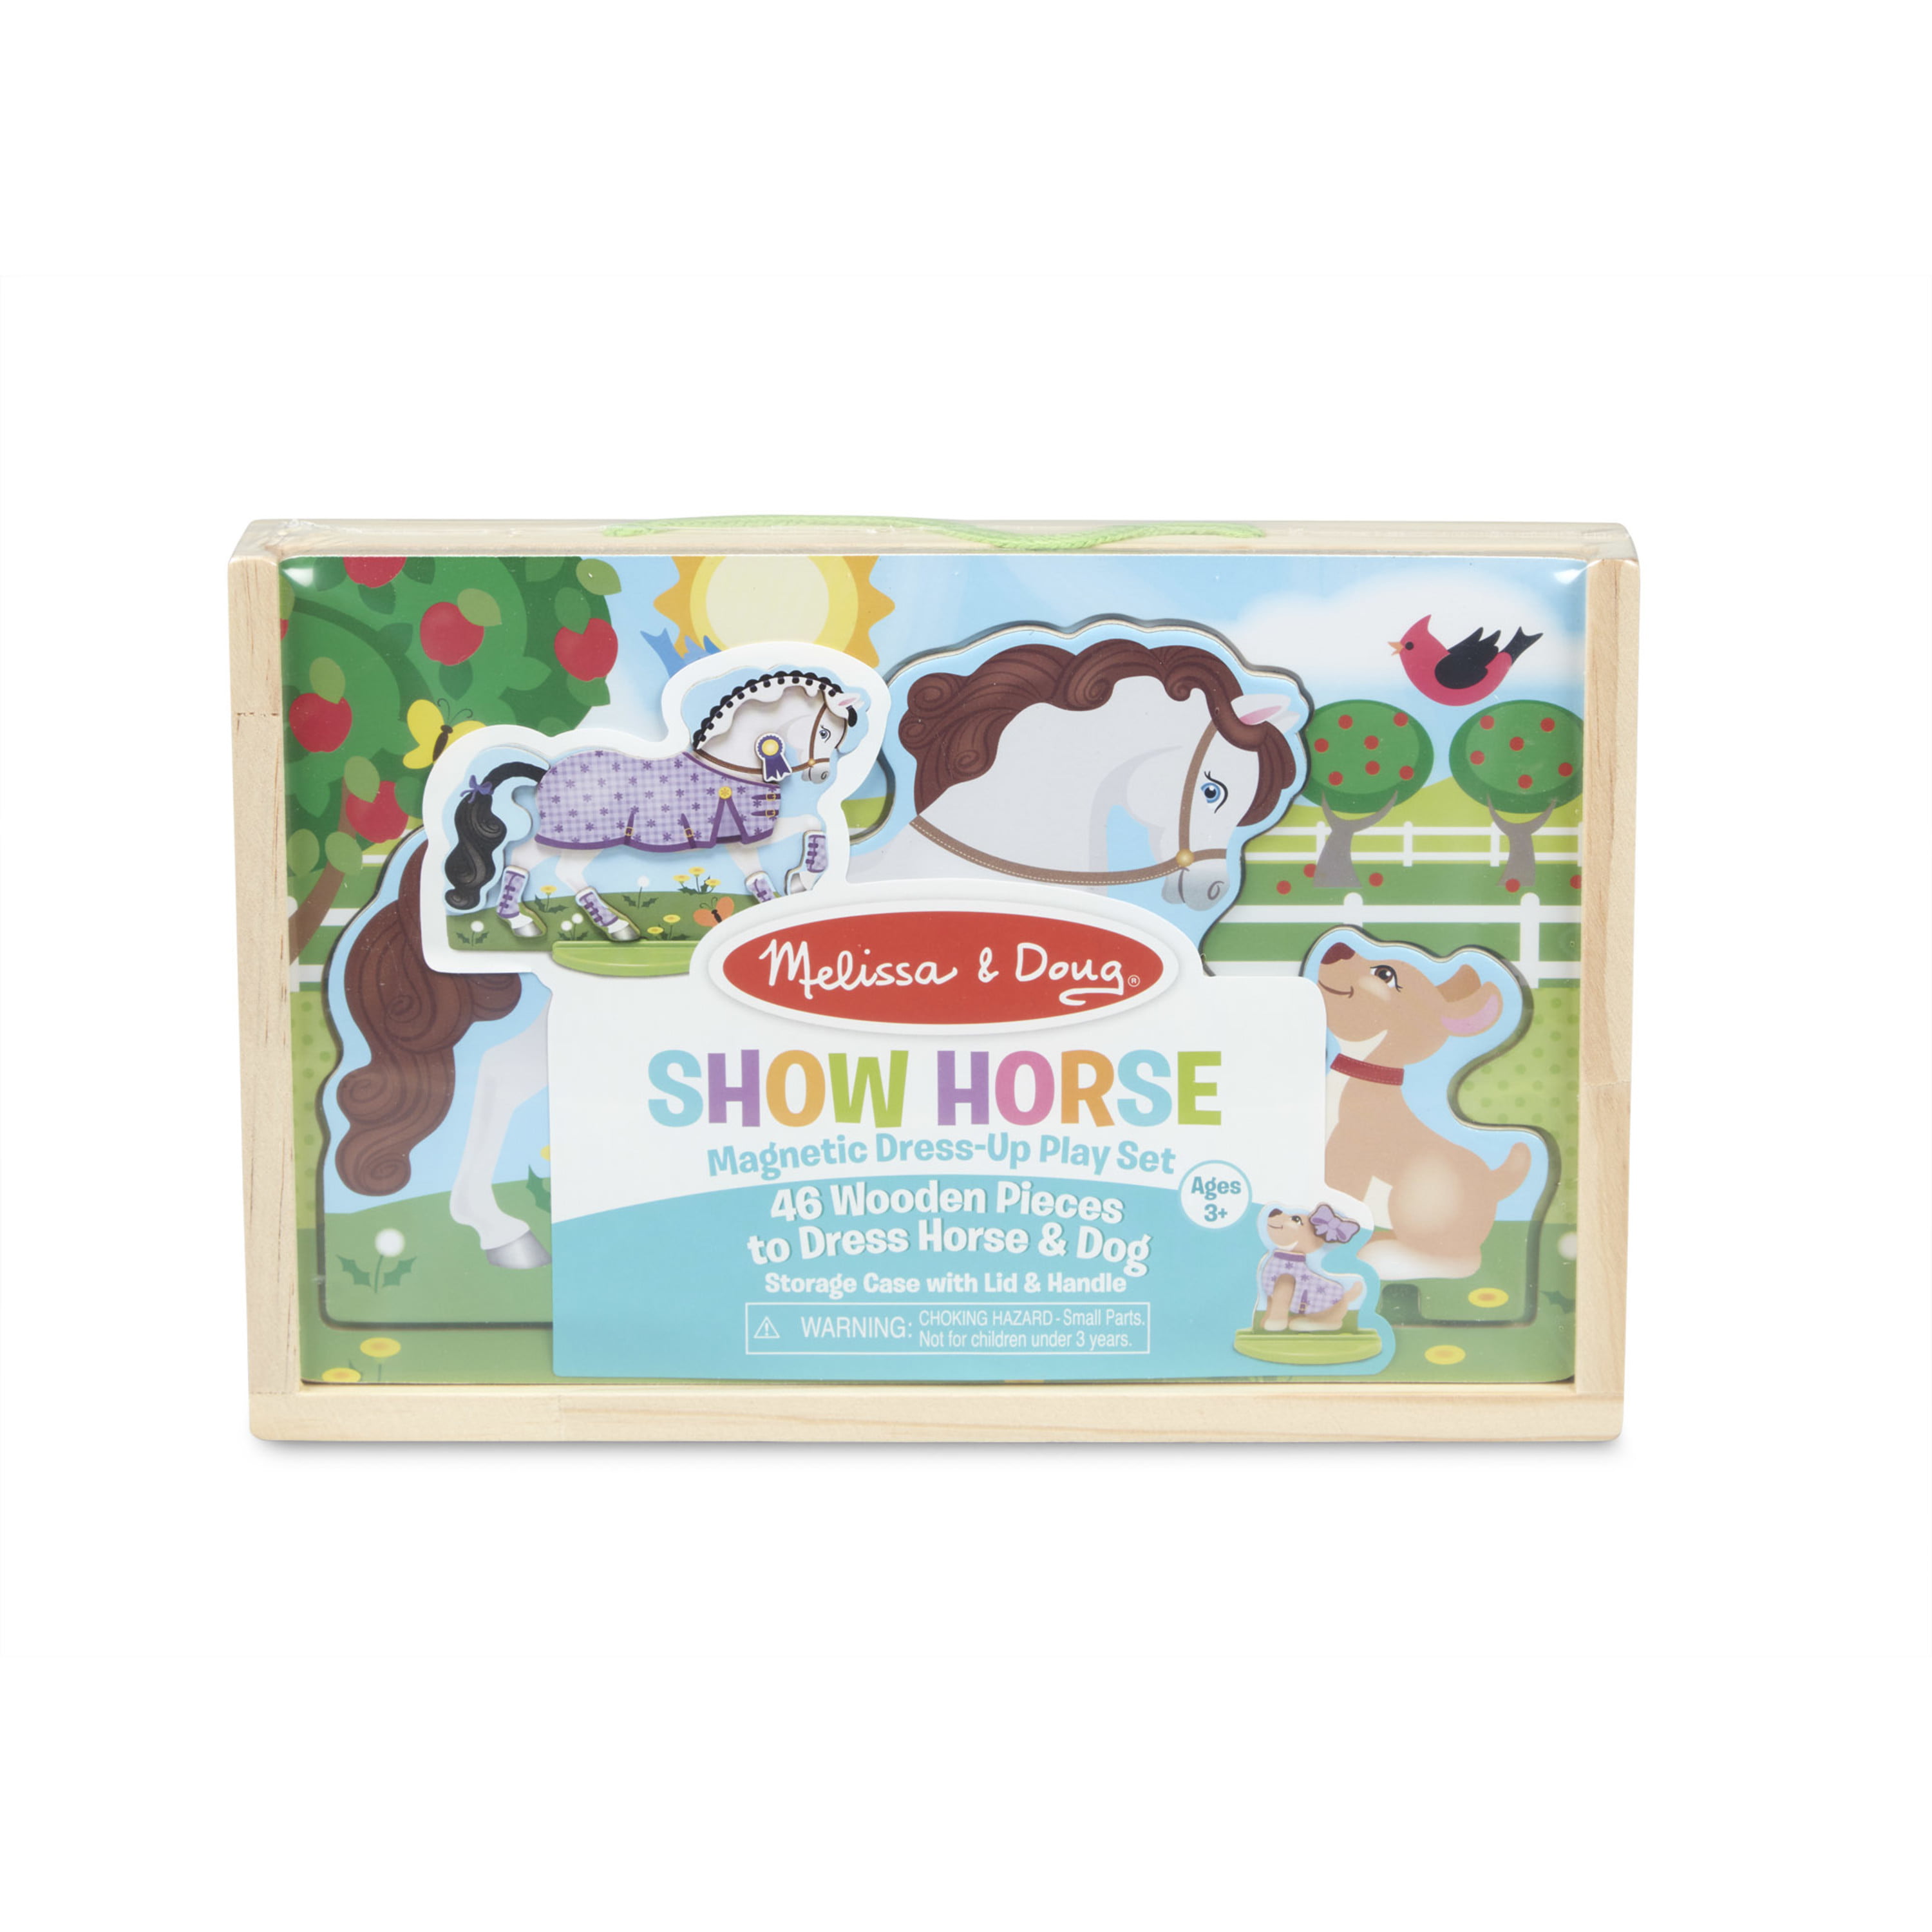 Melissa & Doug 18591 My Horse Clover Magnetic Wooden Dress-Up Doll